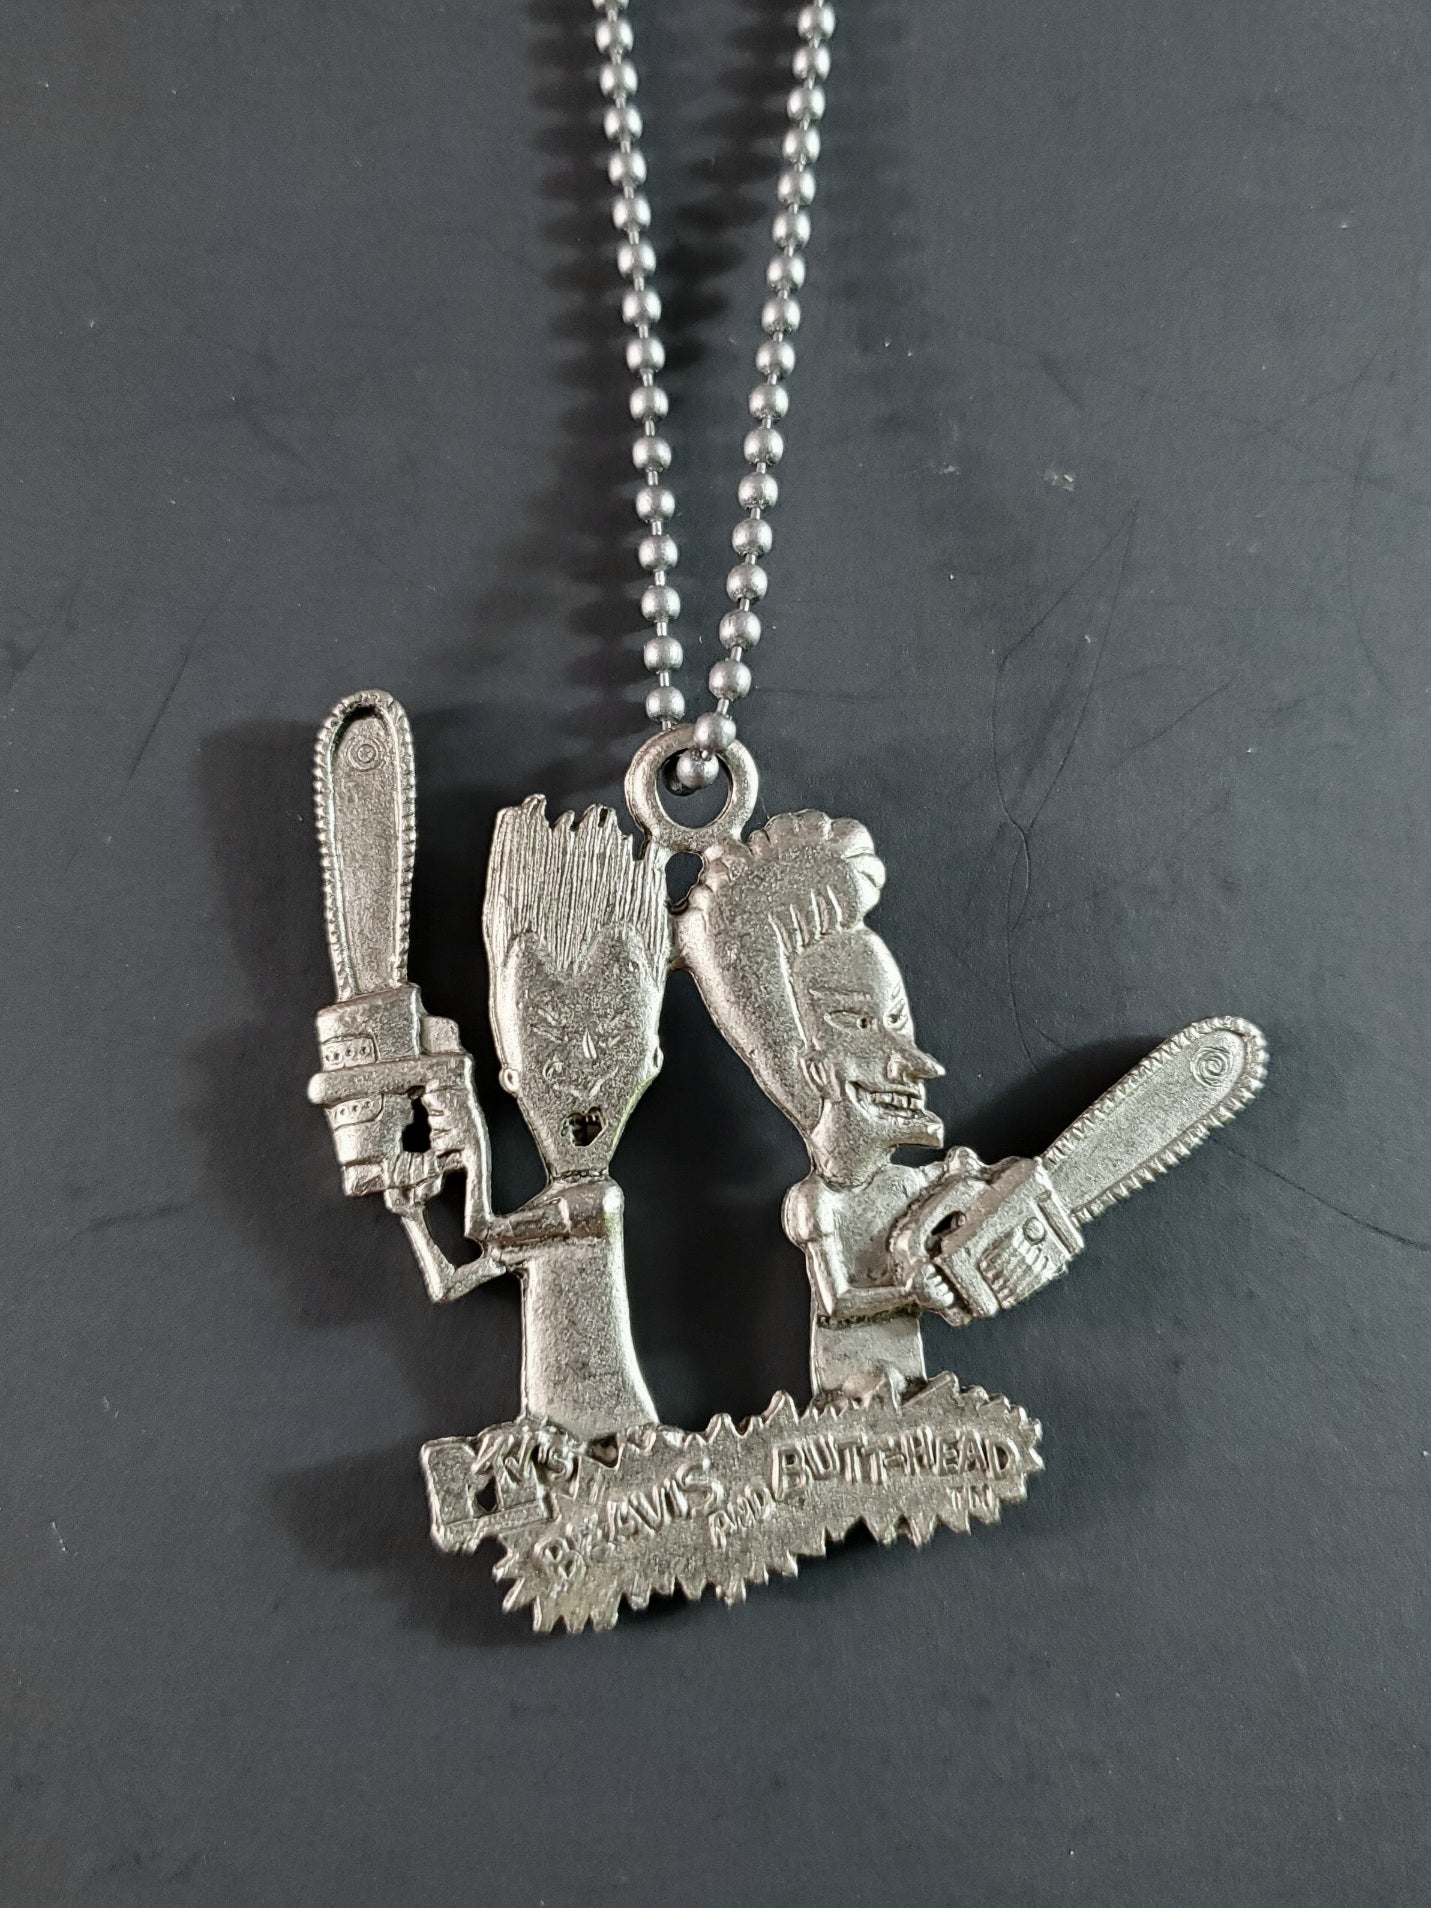 Beavis and Butt-Head deadstock necklace featuring pewter pendant of the duo wielding chainsaws strung on 26" ballchain